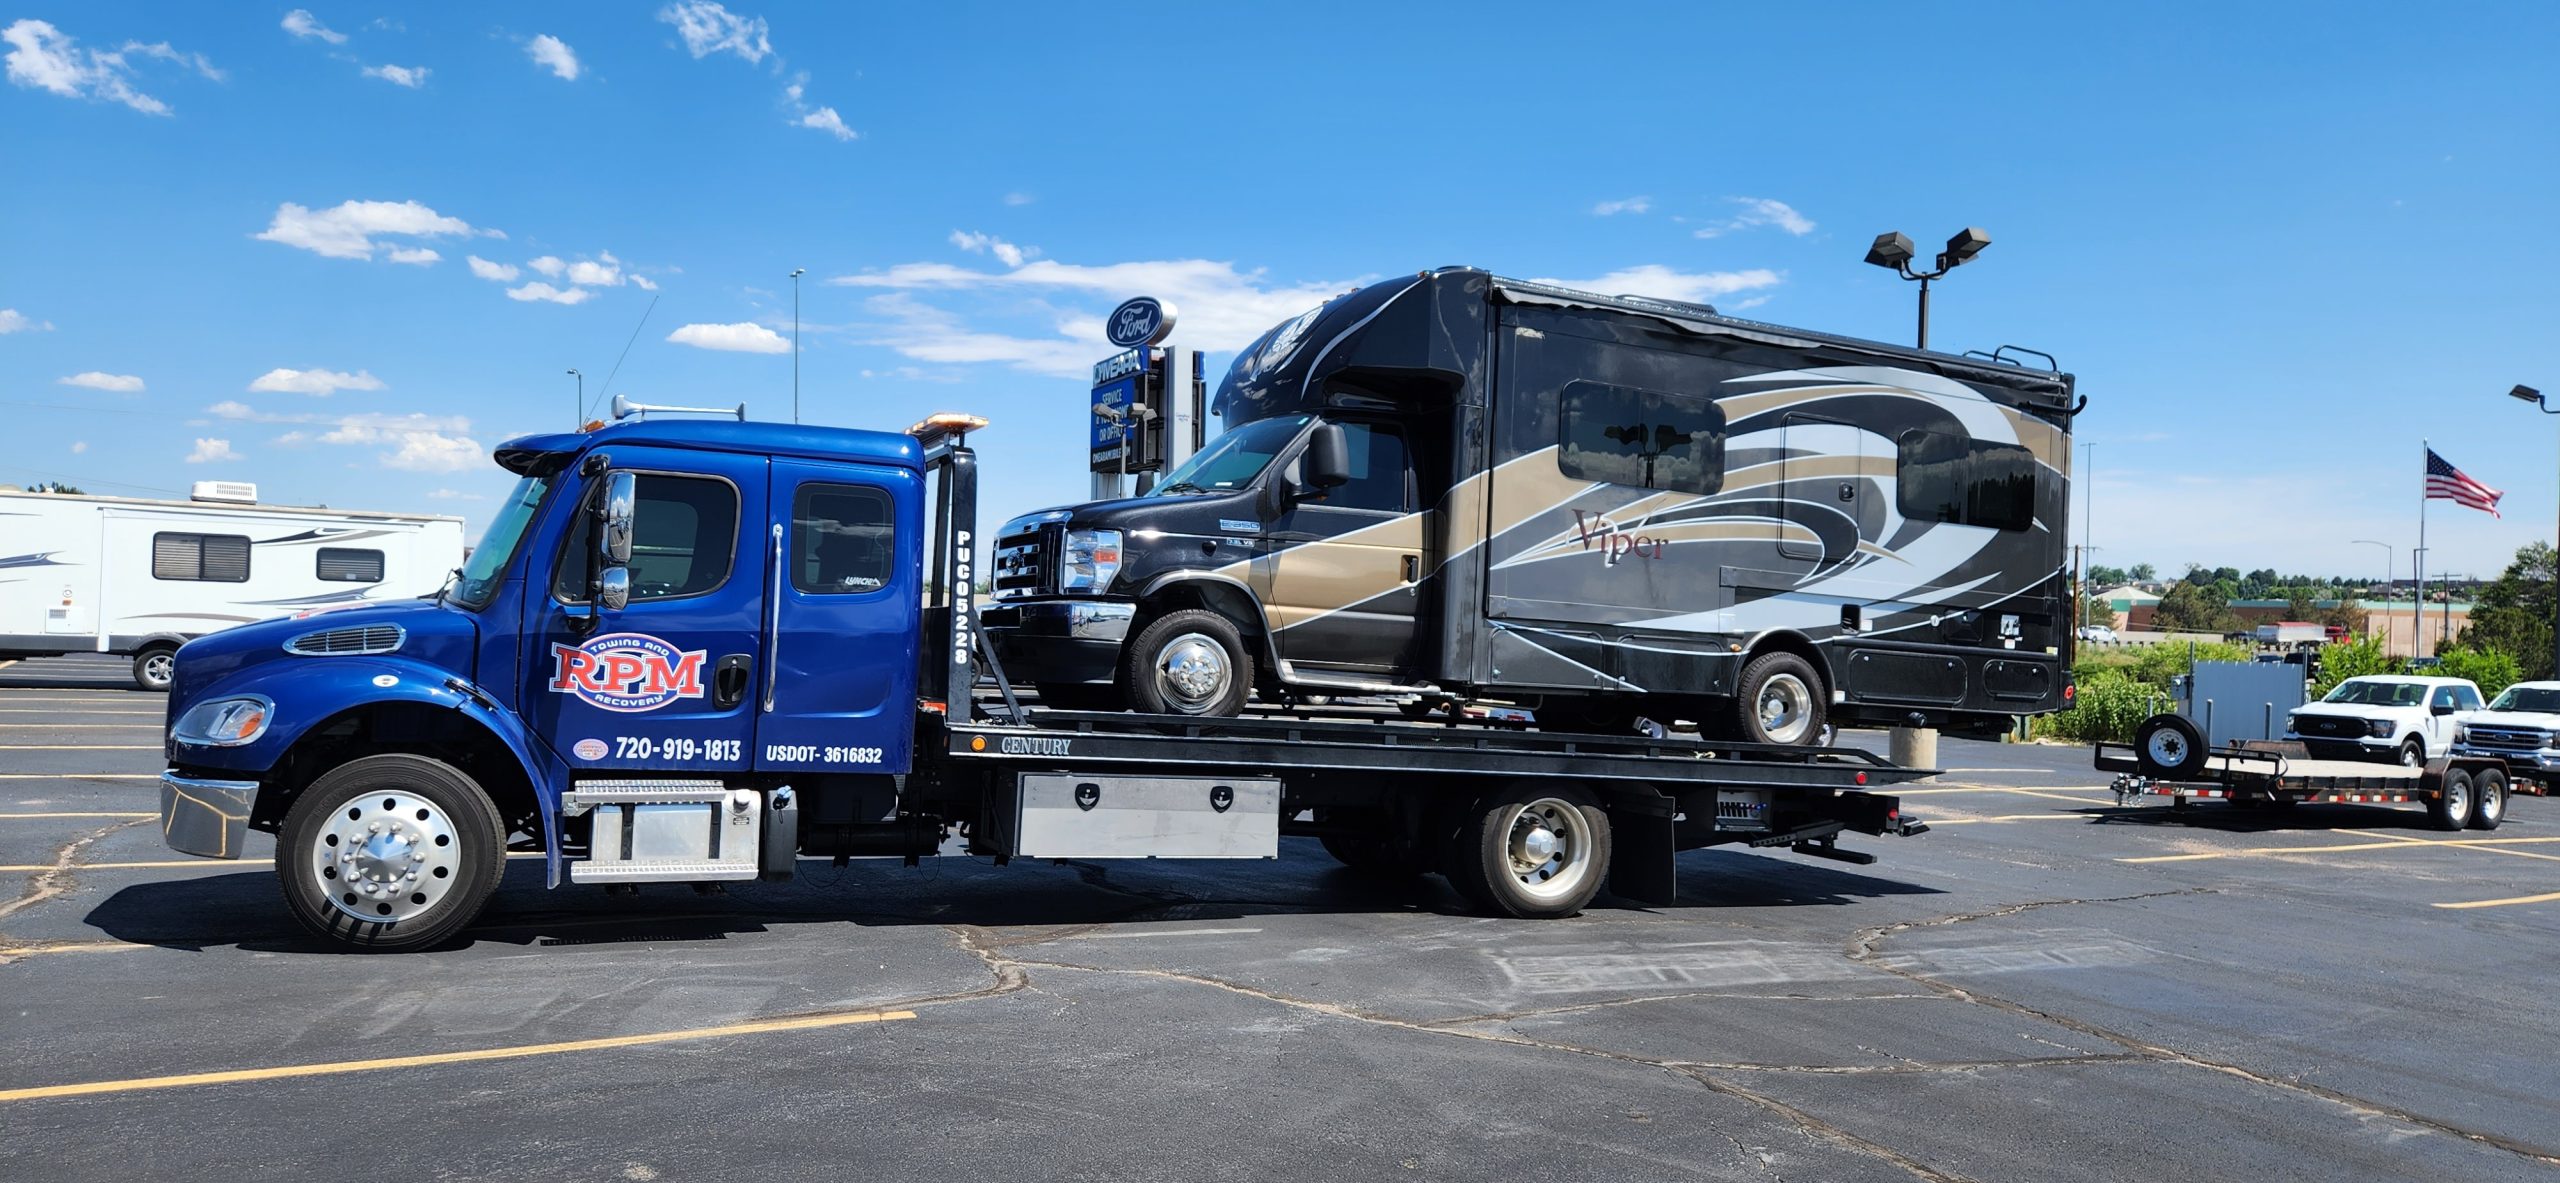 this image shows RV towing services in Aurora, CO